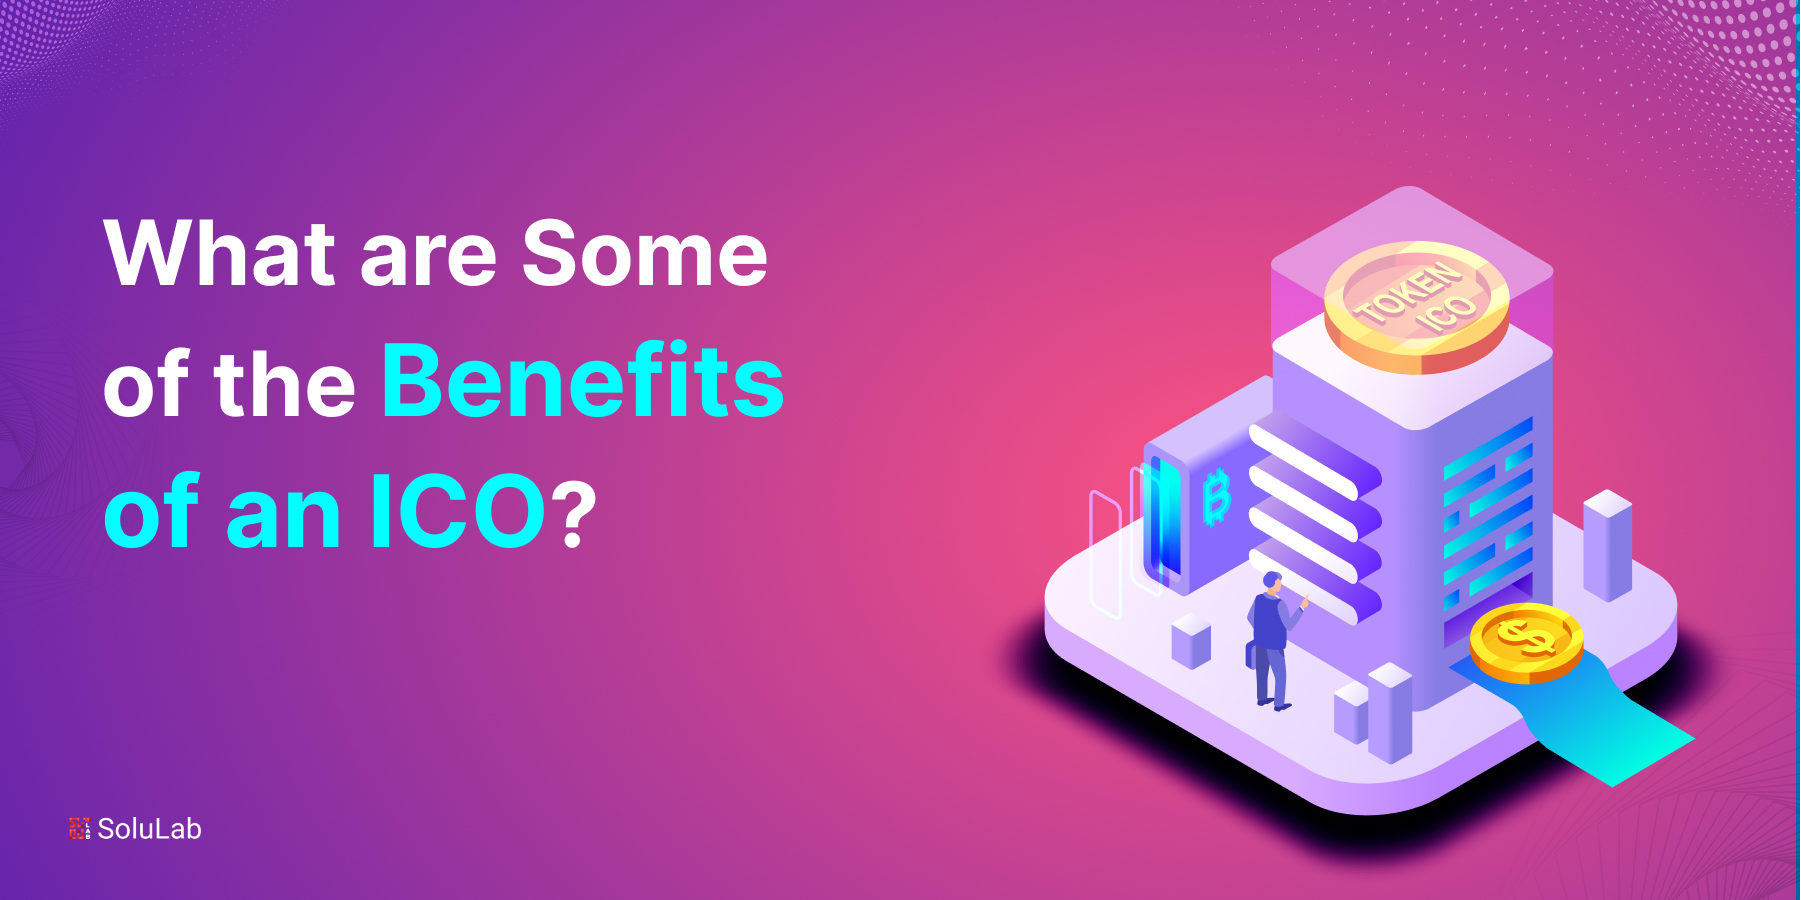 What are Some of the Benefits of an ICO?